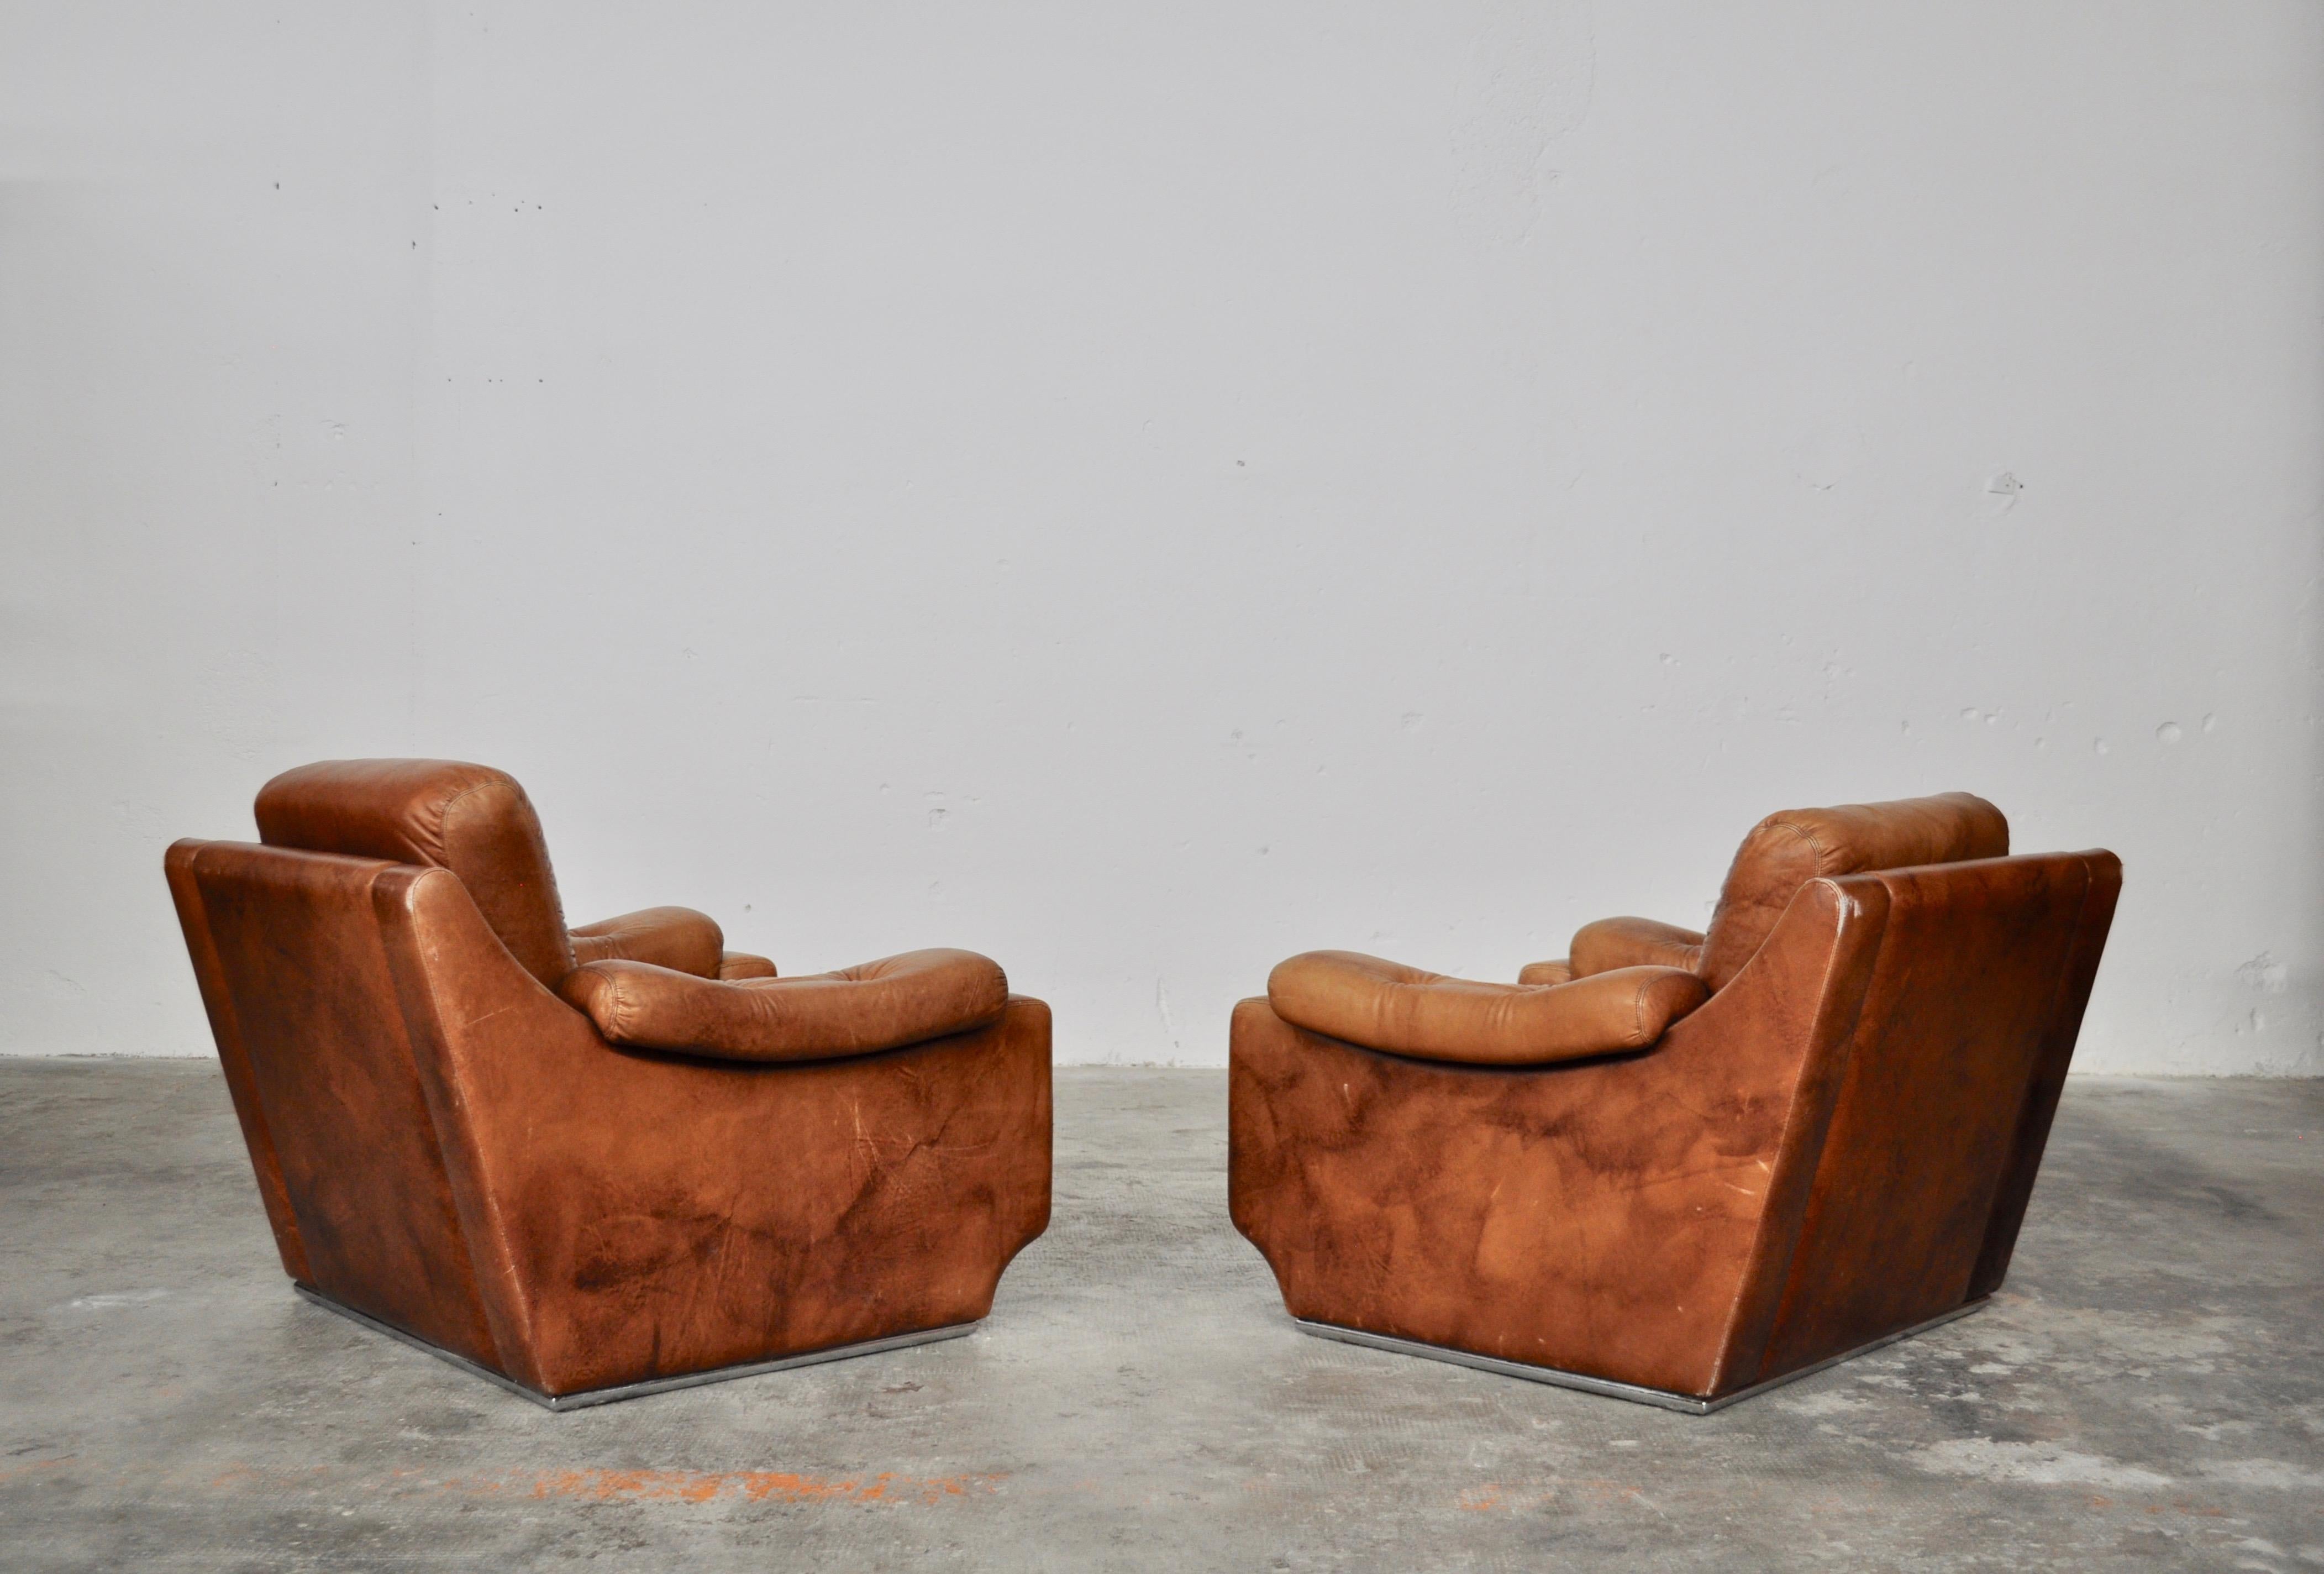 Polished Leather Club Chairs with Metal Polyshed Base Structure, Italy, 1970s For Sale